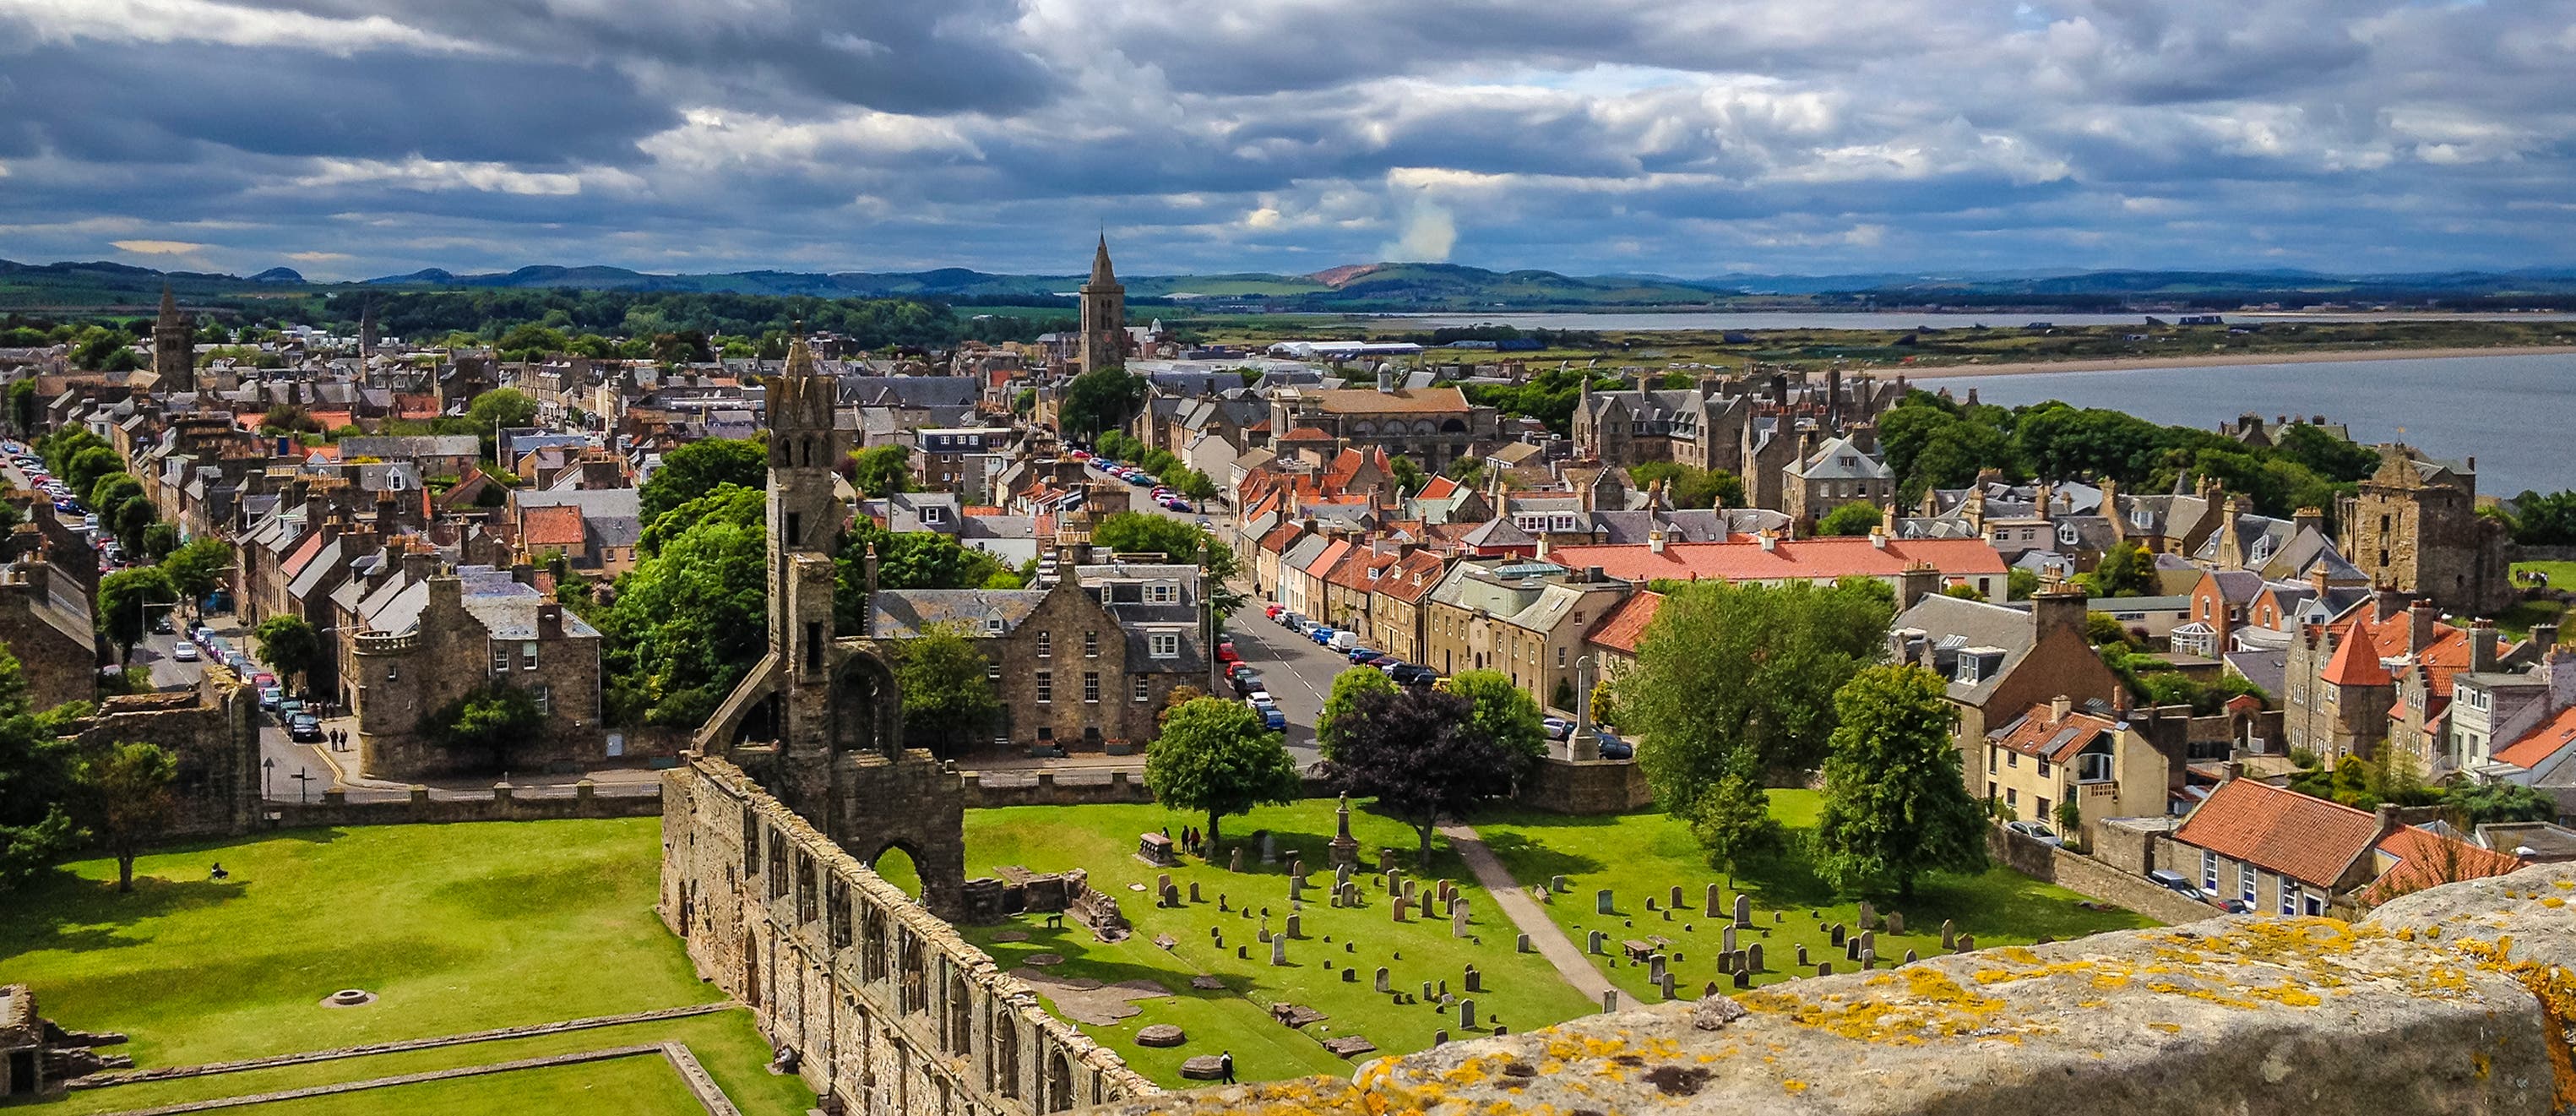 What to see in Scotland St. Andrews